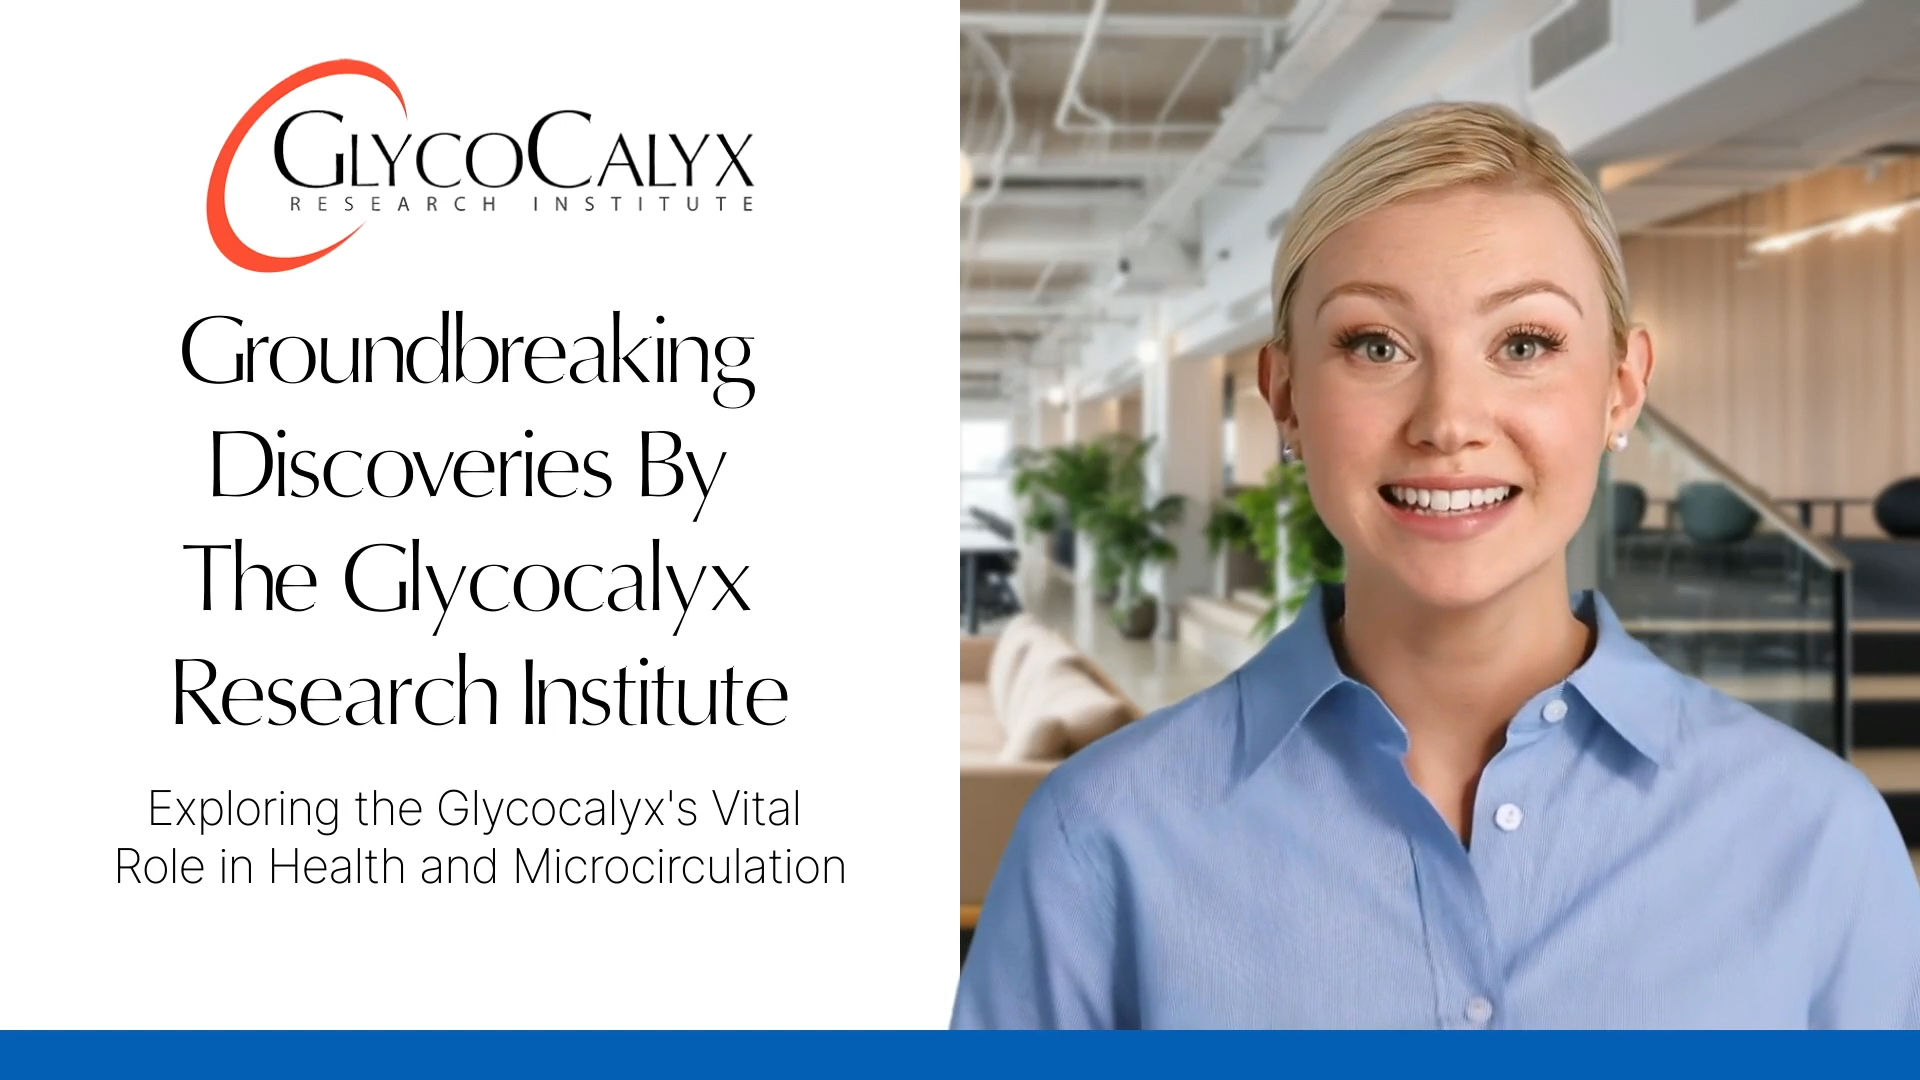 The Glycocalyx Research Institute's overview video introduces its mission to advance understanding of the glycocalyx, a vital vascular structure. Founded in 2012 by Dr. Hans Vink and Robert Long, the institute focuses on the glycocalyx's role in protecting blood vessels and regulating blood flow. The video showcases the institute's advanced research facilities and methodologies, highlighting studies on the glycocalyx at the molecular level. It discusses innovative therapeutic approaches to restore glycocalyx function, aiming to treat cardiovascular diseases. Emphasizing collaboration and education, the institute partners with academic and healthcare organizations and trains future scientists. The video concludes by highlighting the institute's impact on developing better diagnostics and treatments for cardiovascular diseases, improving patient outcomes, and encouraging support for its mission.